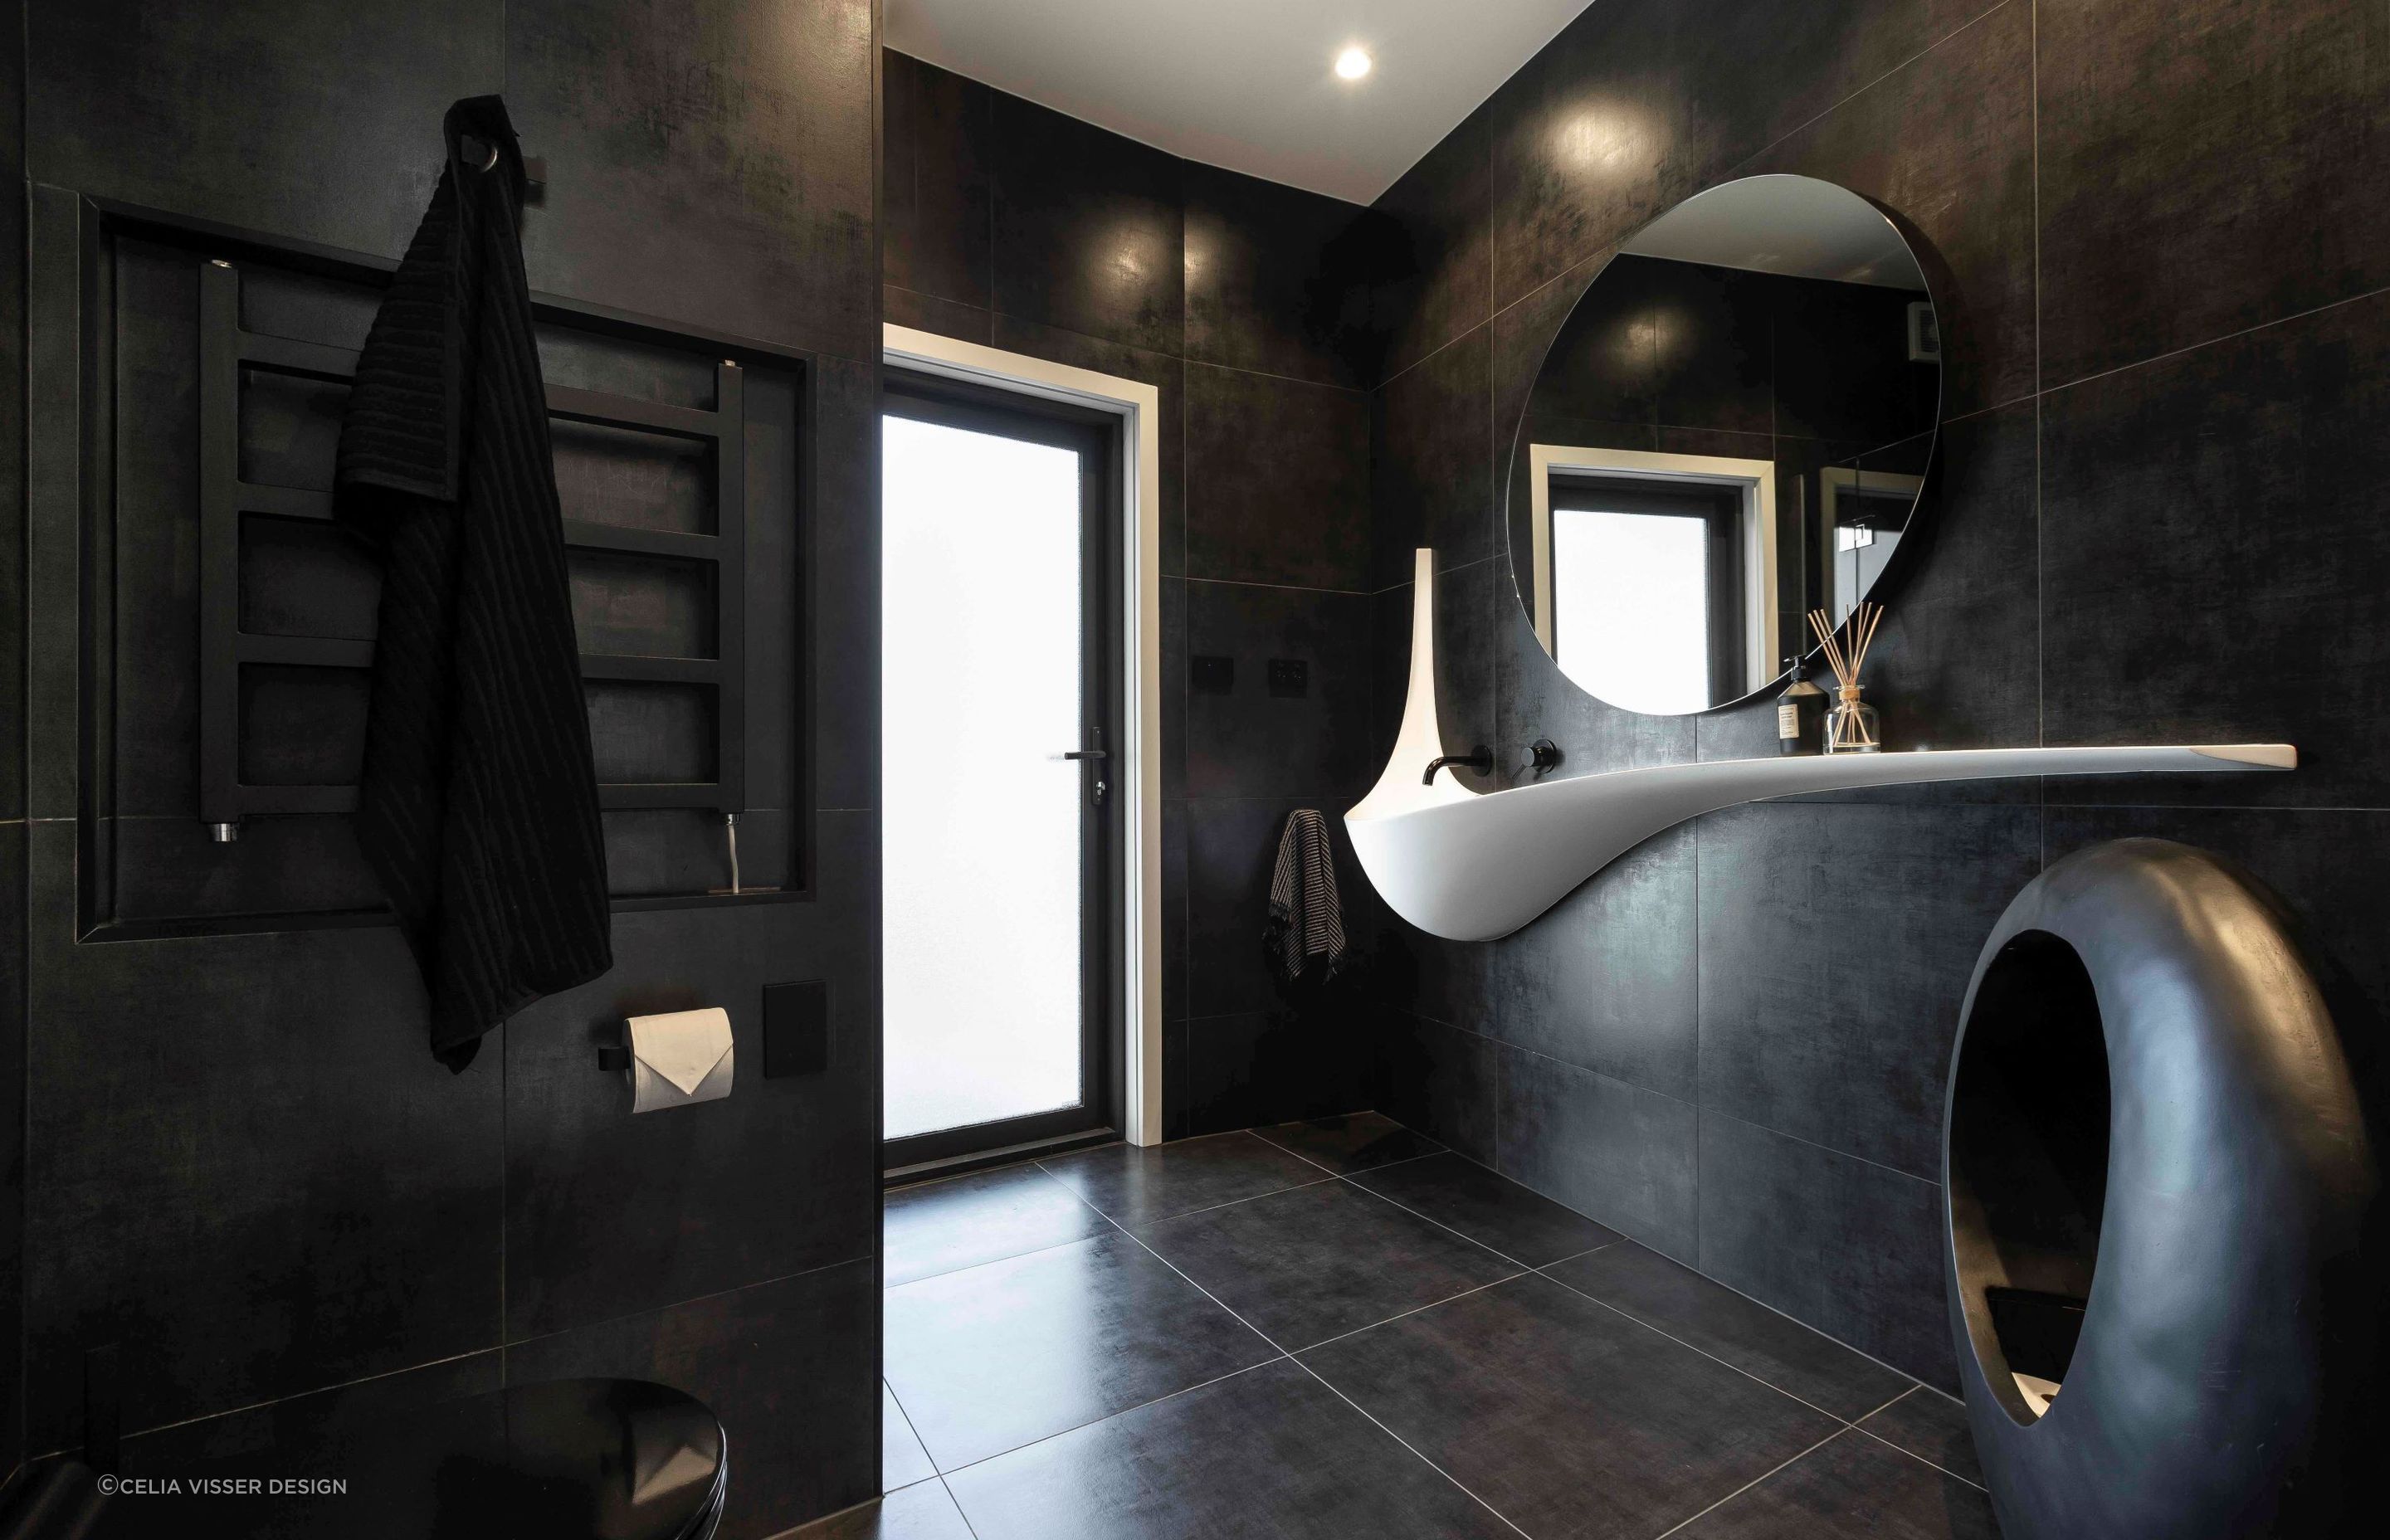 Modern bathroom designs, like this stylish black bathroom in Wiri, are much more daring with their colour schemes.